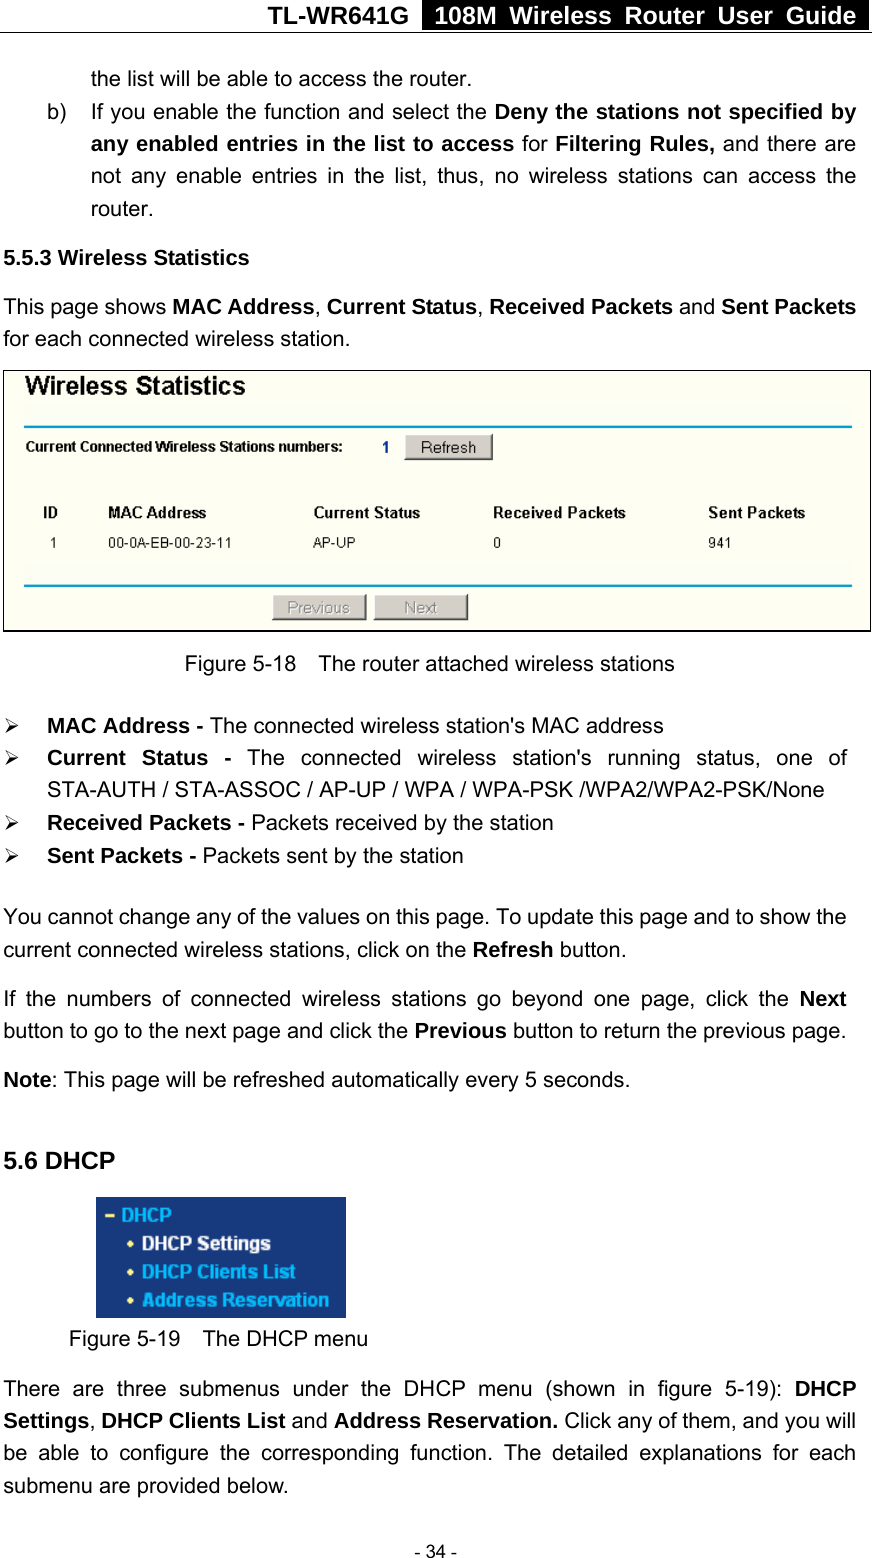 TL-WR641G   108M Wireless Router User Guide  the list will be able to access the router. b)  If you enable the function and select the Deny the stations not specified by any enabled entries in the list to access for Filtering Rules, and there are not any enable entries in the list, thus, no wireless stations can access the router. 5.5.3 Wireless Statistics This page shows MAC Address, Current Status, Received Packets and Sent Packets for each connected wireless station.  Figure 5-18    The router attached wireless stations ¾ MAC Address - The connected wireless station&apos;s MAC address ¾ Current Status - The connected wireless station&apos;s running status, one of STA-AUTH / STA-ASSOC / AP-UP / WPA / WPA-PSK /WPA2/WPA2-PSK/None ¾ Received Packets - Packets received by the station ¾ Sent Packets - Packets sent by the station You cannot change any of the values on this page. To update this page and to show the current connected wireless stations, click on the Refresh button.   If the numbers of connected wireless stations go beyond one page, click the Next button to go to the next page and click the Previous button to return the previous page. Note: This page will be refreshed automatically every 5 seconds.  5.6 DHCP  Figure 5-19    The DHCP menu There are three submenus under the DHCP menu (shown in figure 5-19): DHCP Settings, DHCP Clients List and Address Reservation. Click any of them, and you will be able to configure the corresponding function. The detailed explanations for each submenu are provided below.  - 34 - 